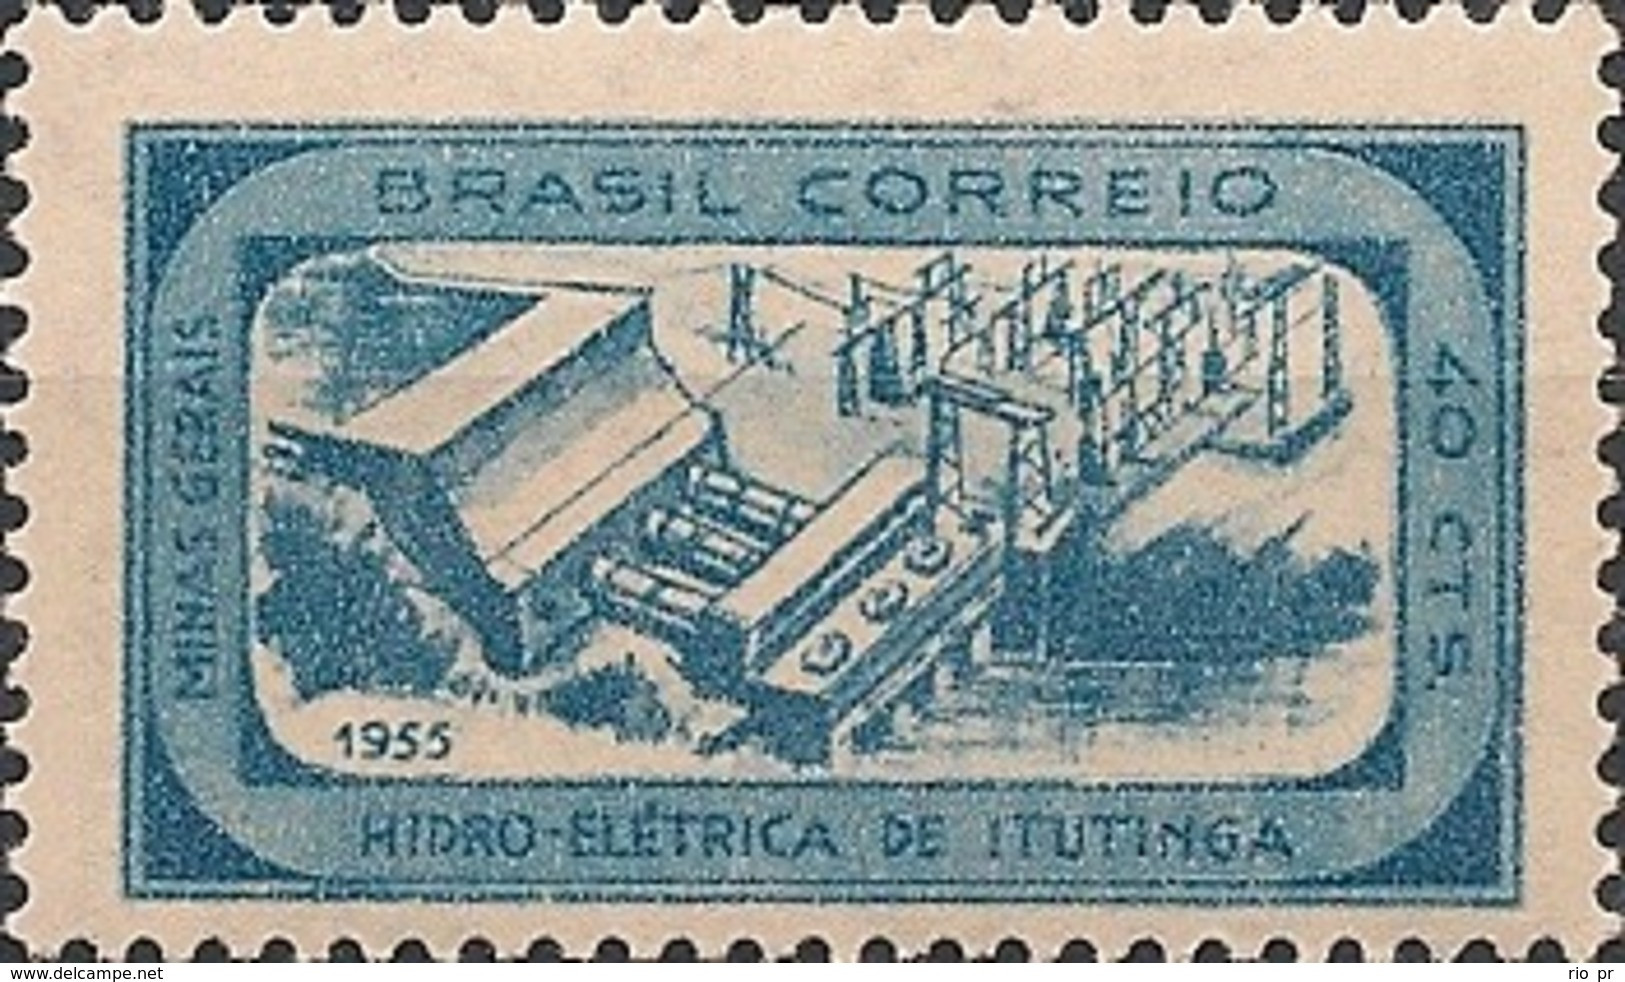 BRAZIL - INAUGURATION OF THE ITUTINGA HYDROELECTRIC PLANT AT LAVRAS 1955 - MNH - Water